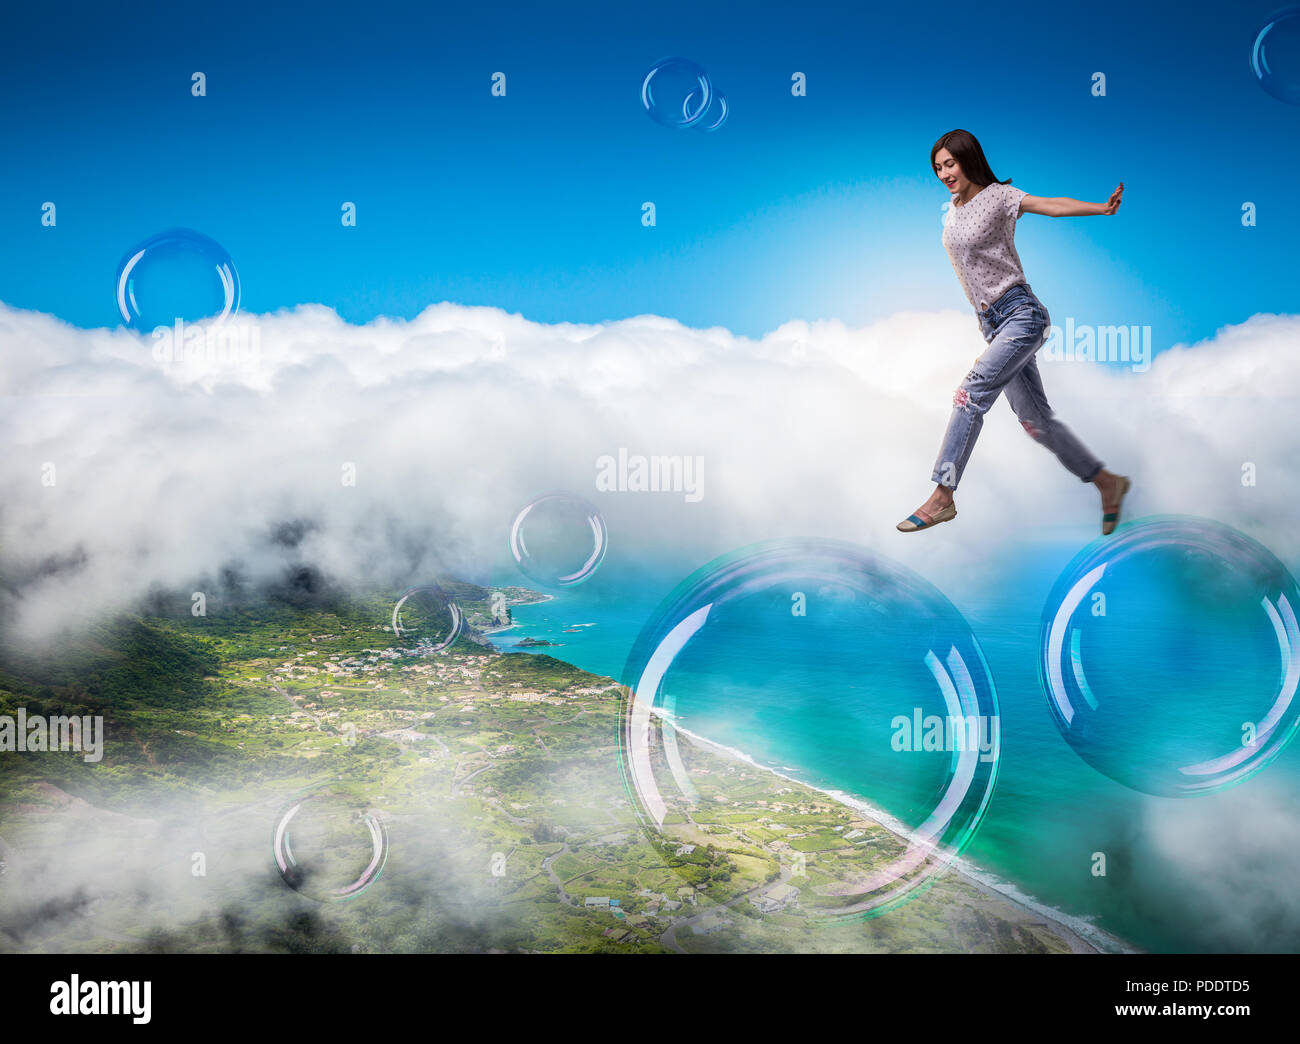 Cute woman jumping in the sky on big soap bubbles Stock Photo